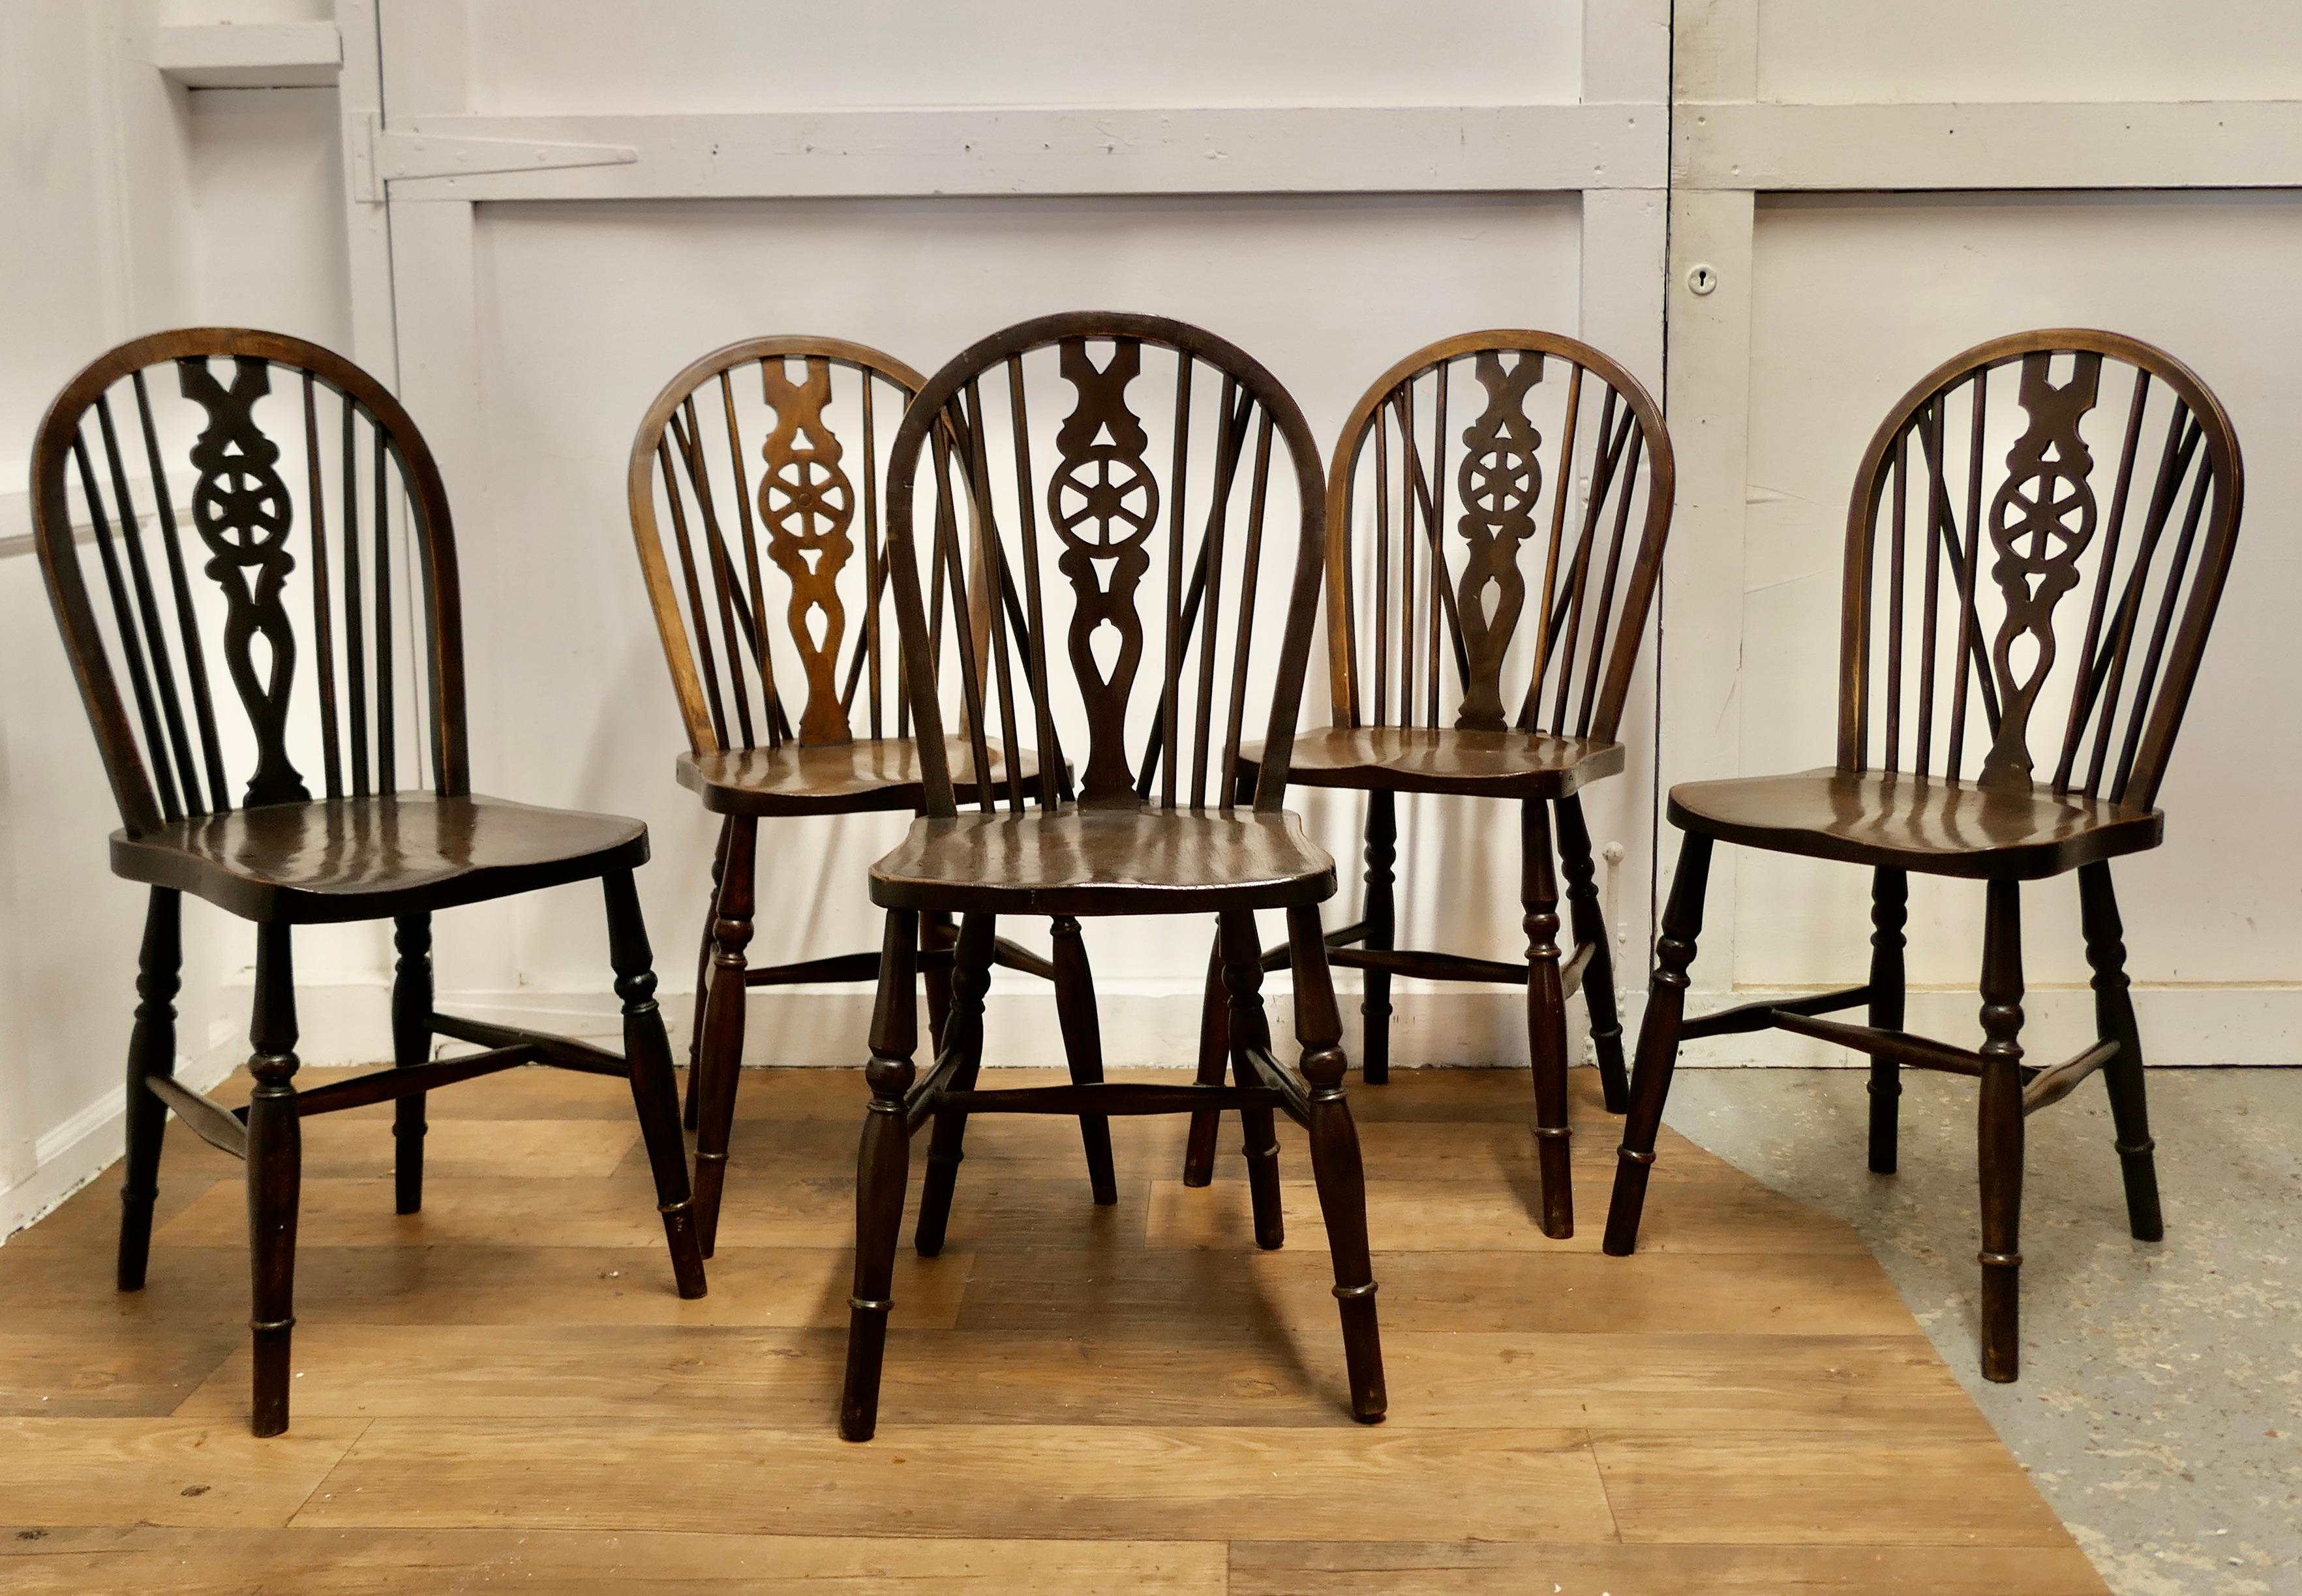 Harlequin Set of 5 Victorian Beech & Elm Wheel Back Windsor Kitchen Dining Chairs

The chairs are a classic design and traditionally made from solid wood they have hooped backs 4 of them have a wedge in the traditional Windsor style, the back centre